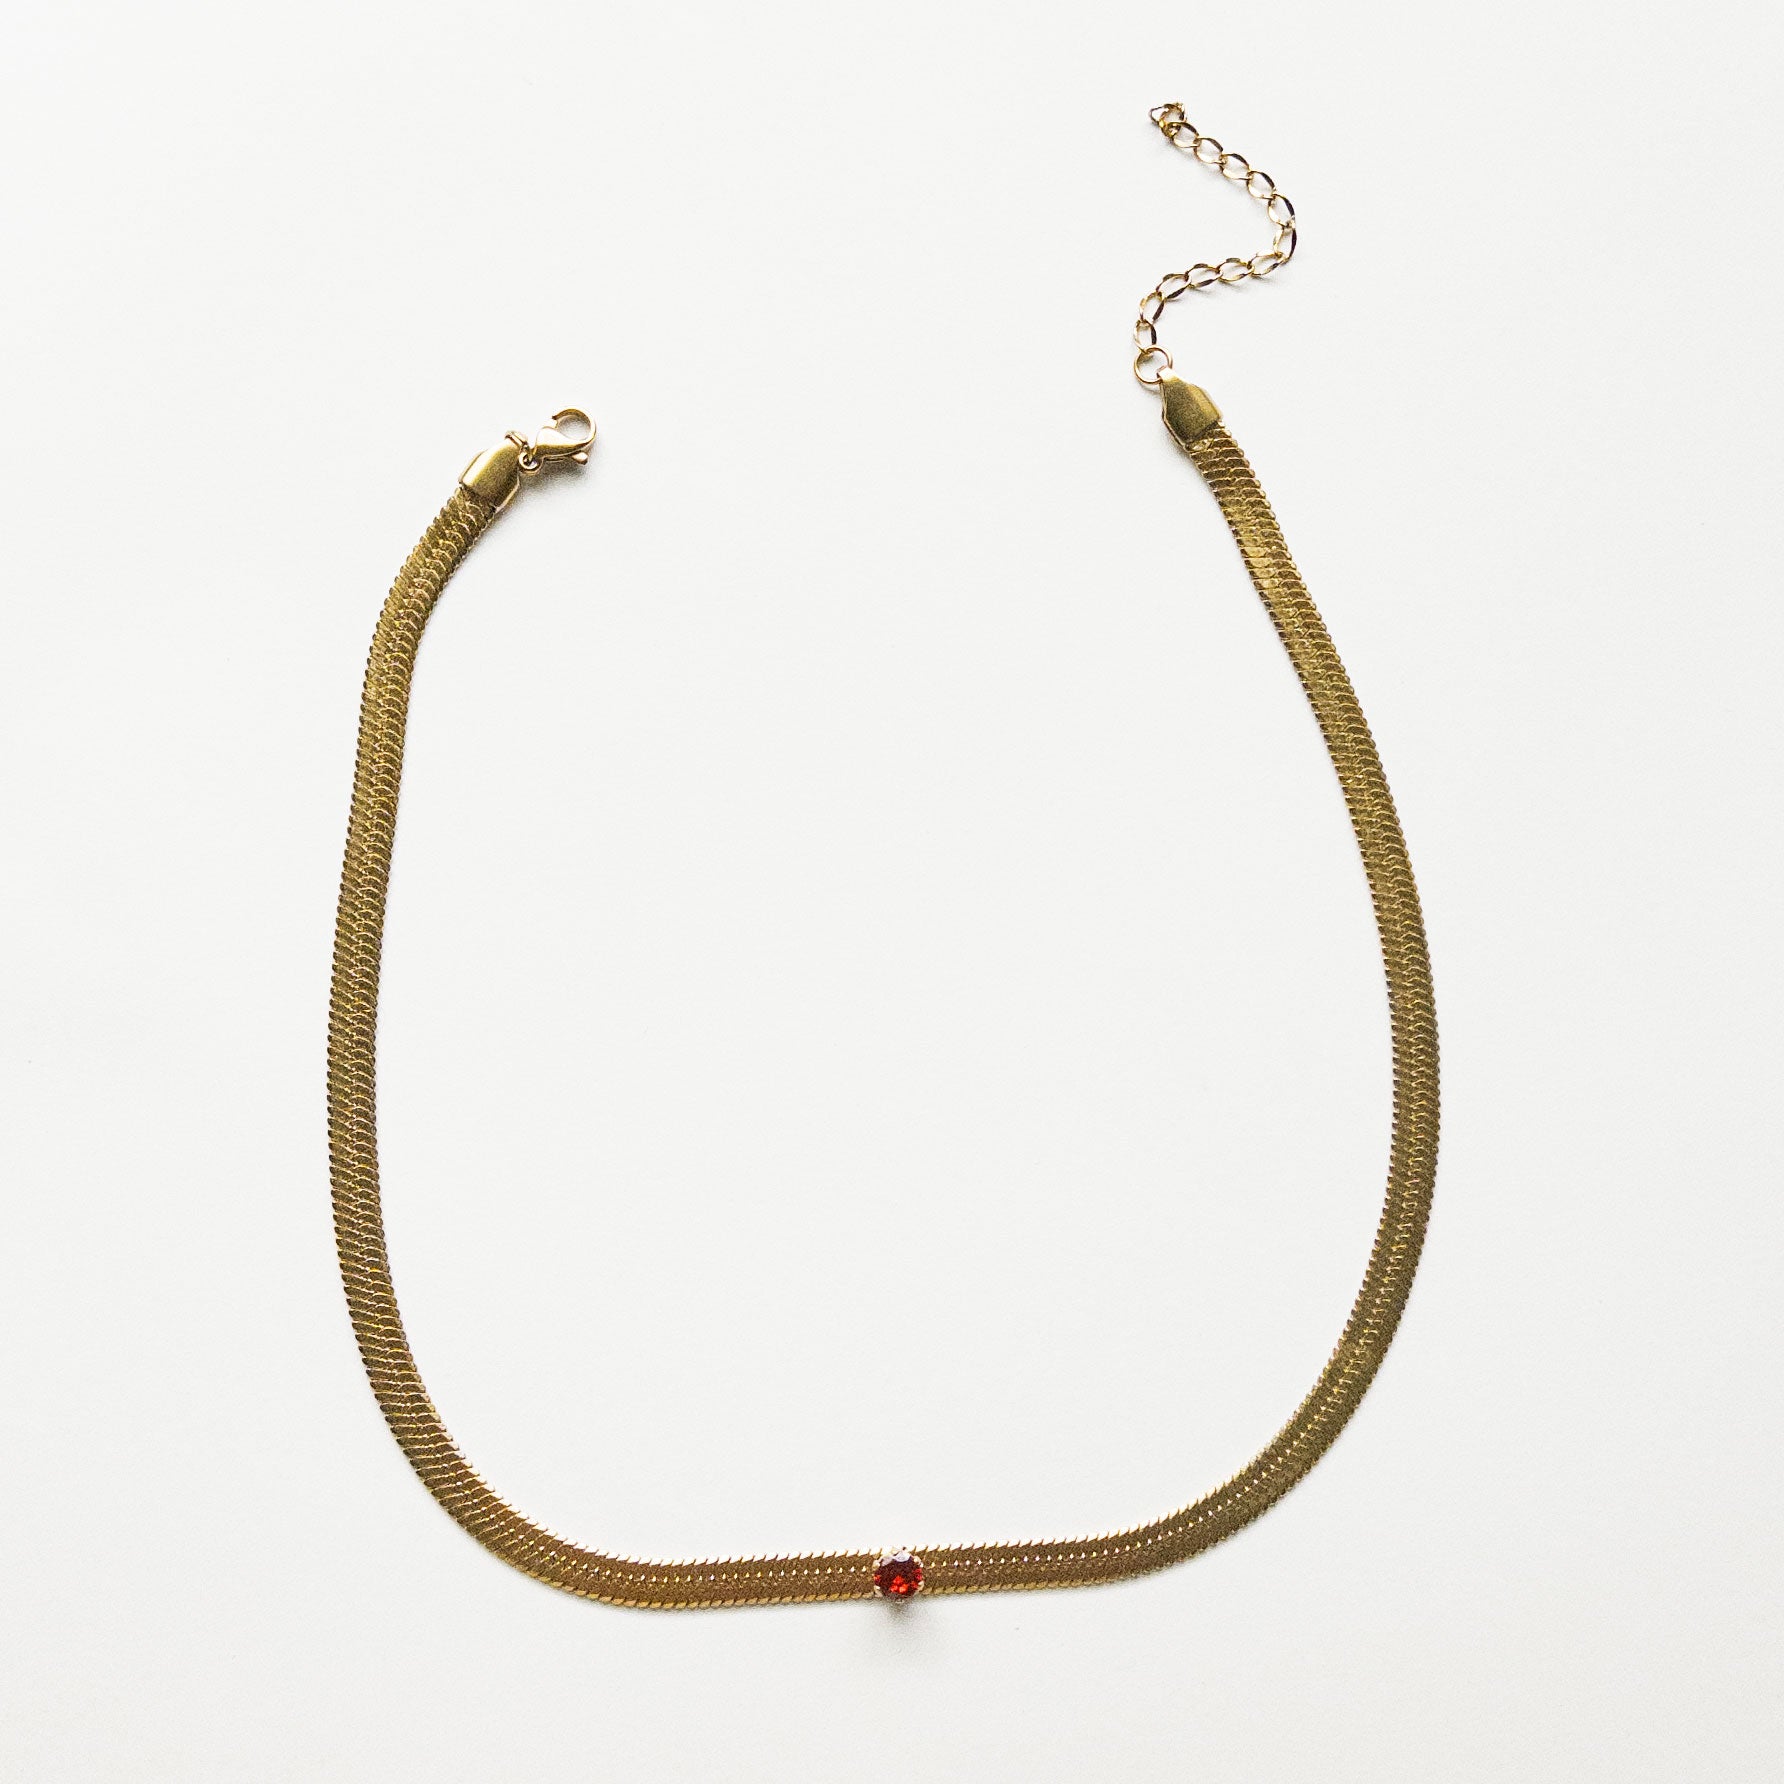 Stainless steel gold colored snake chain choker/necklace featuring a ruby red cubic zirconia gem in the center. Can be dress up or down. Perfect for layering and everyday wear. 